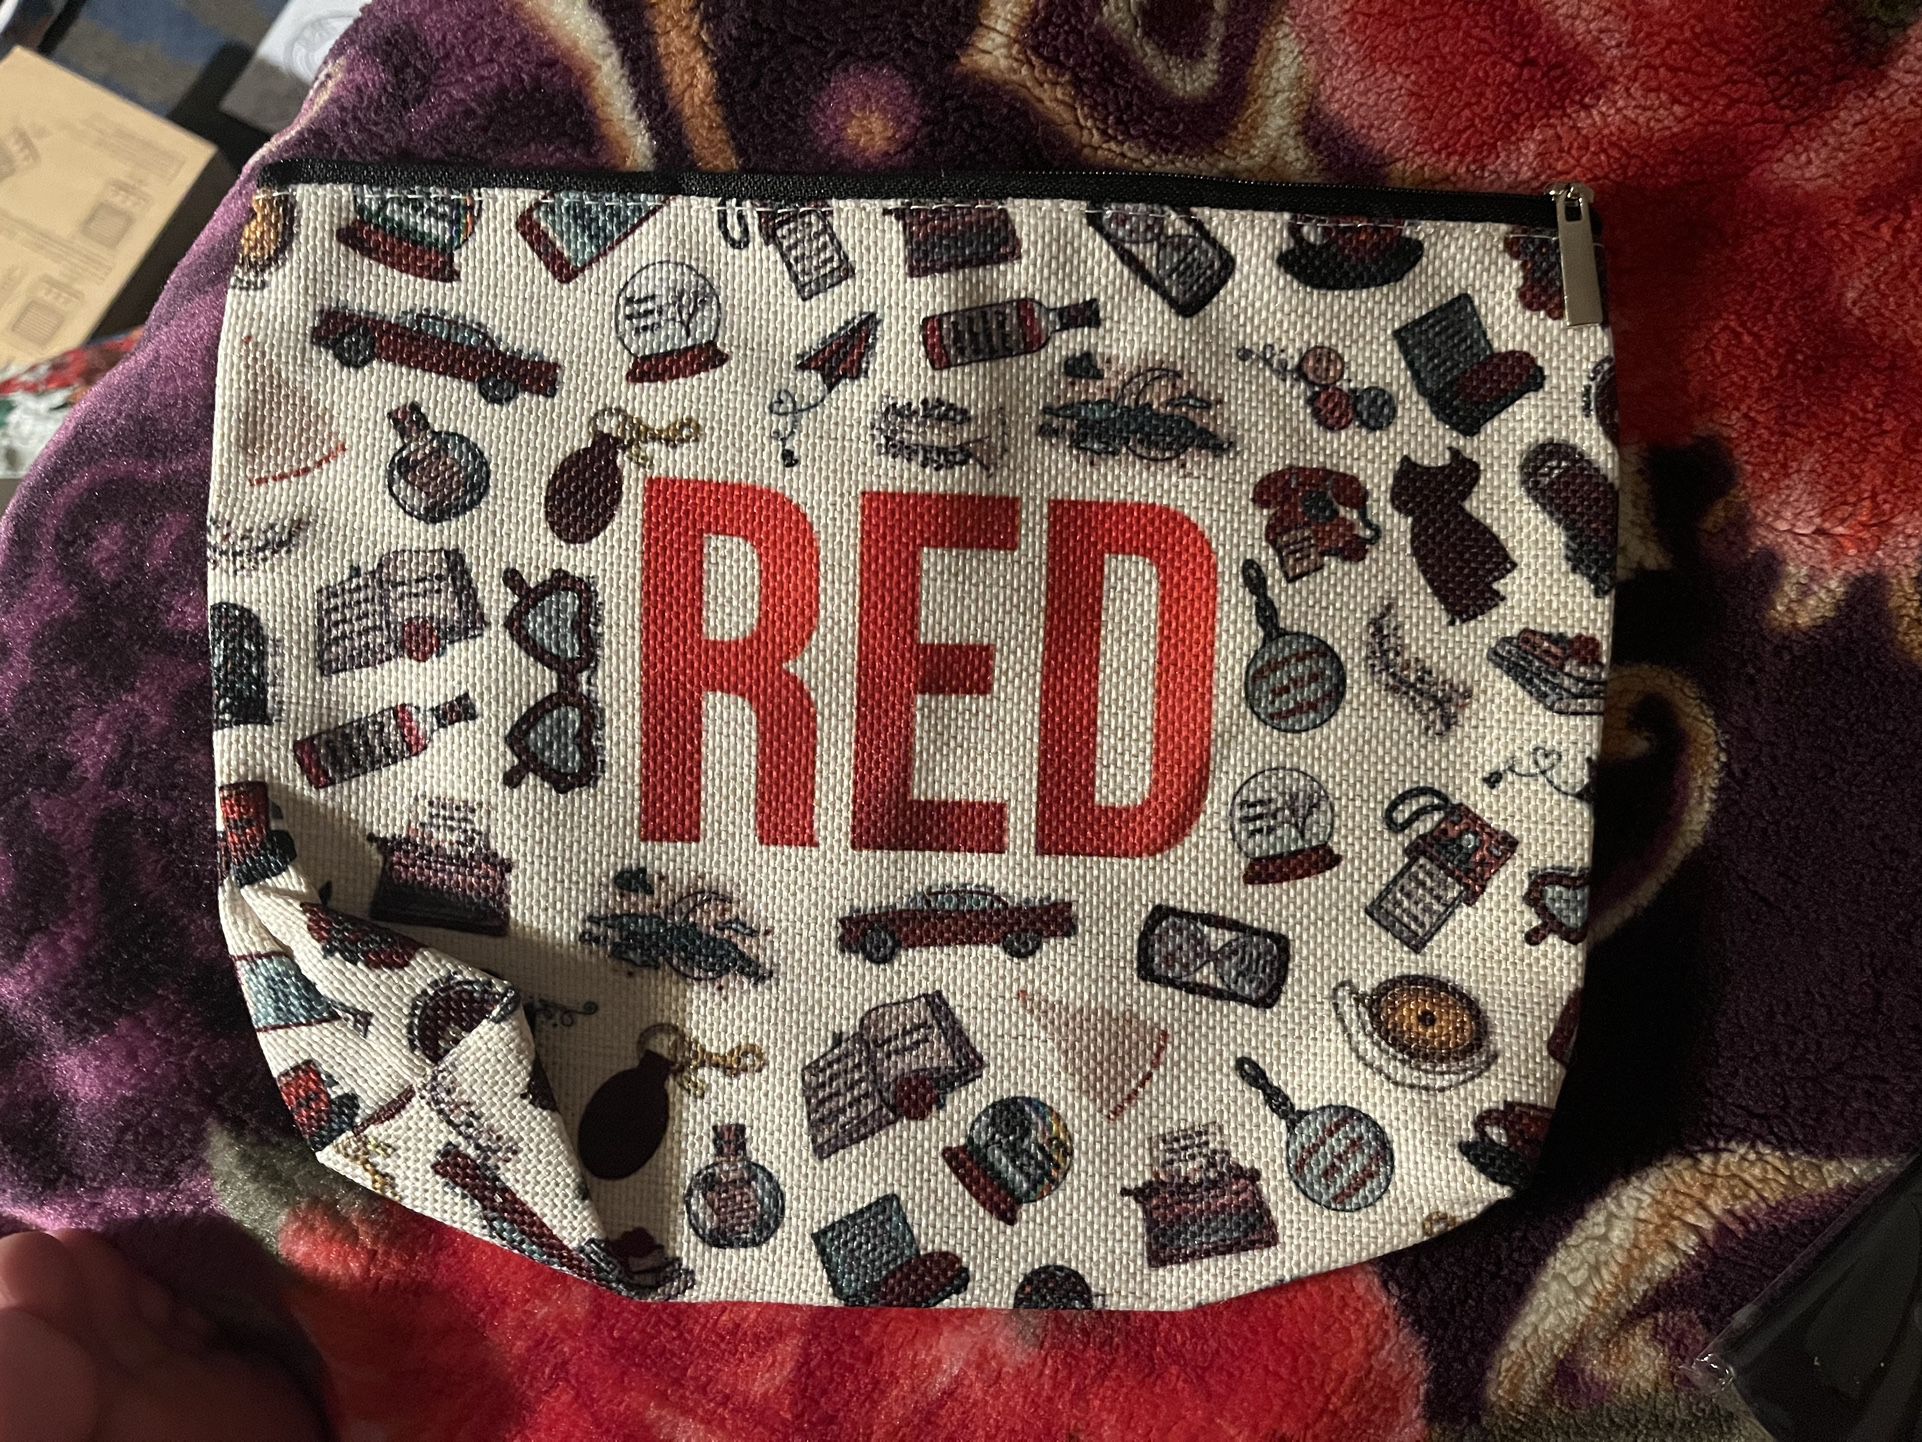 Taylor Swift Red Bag 